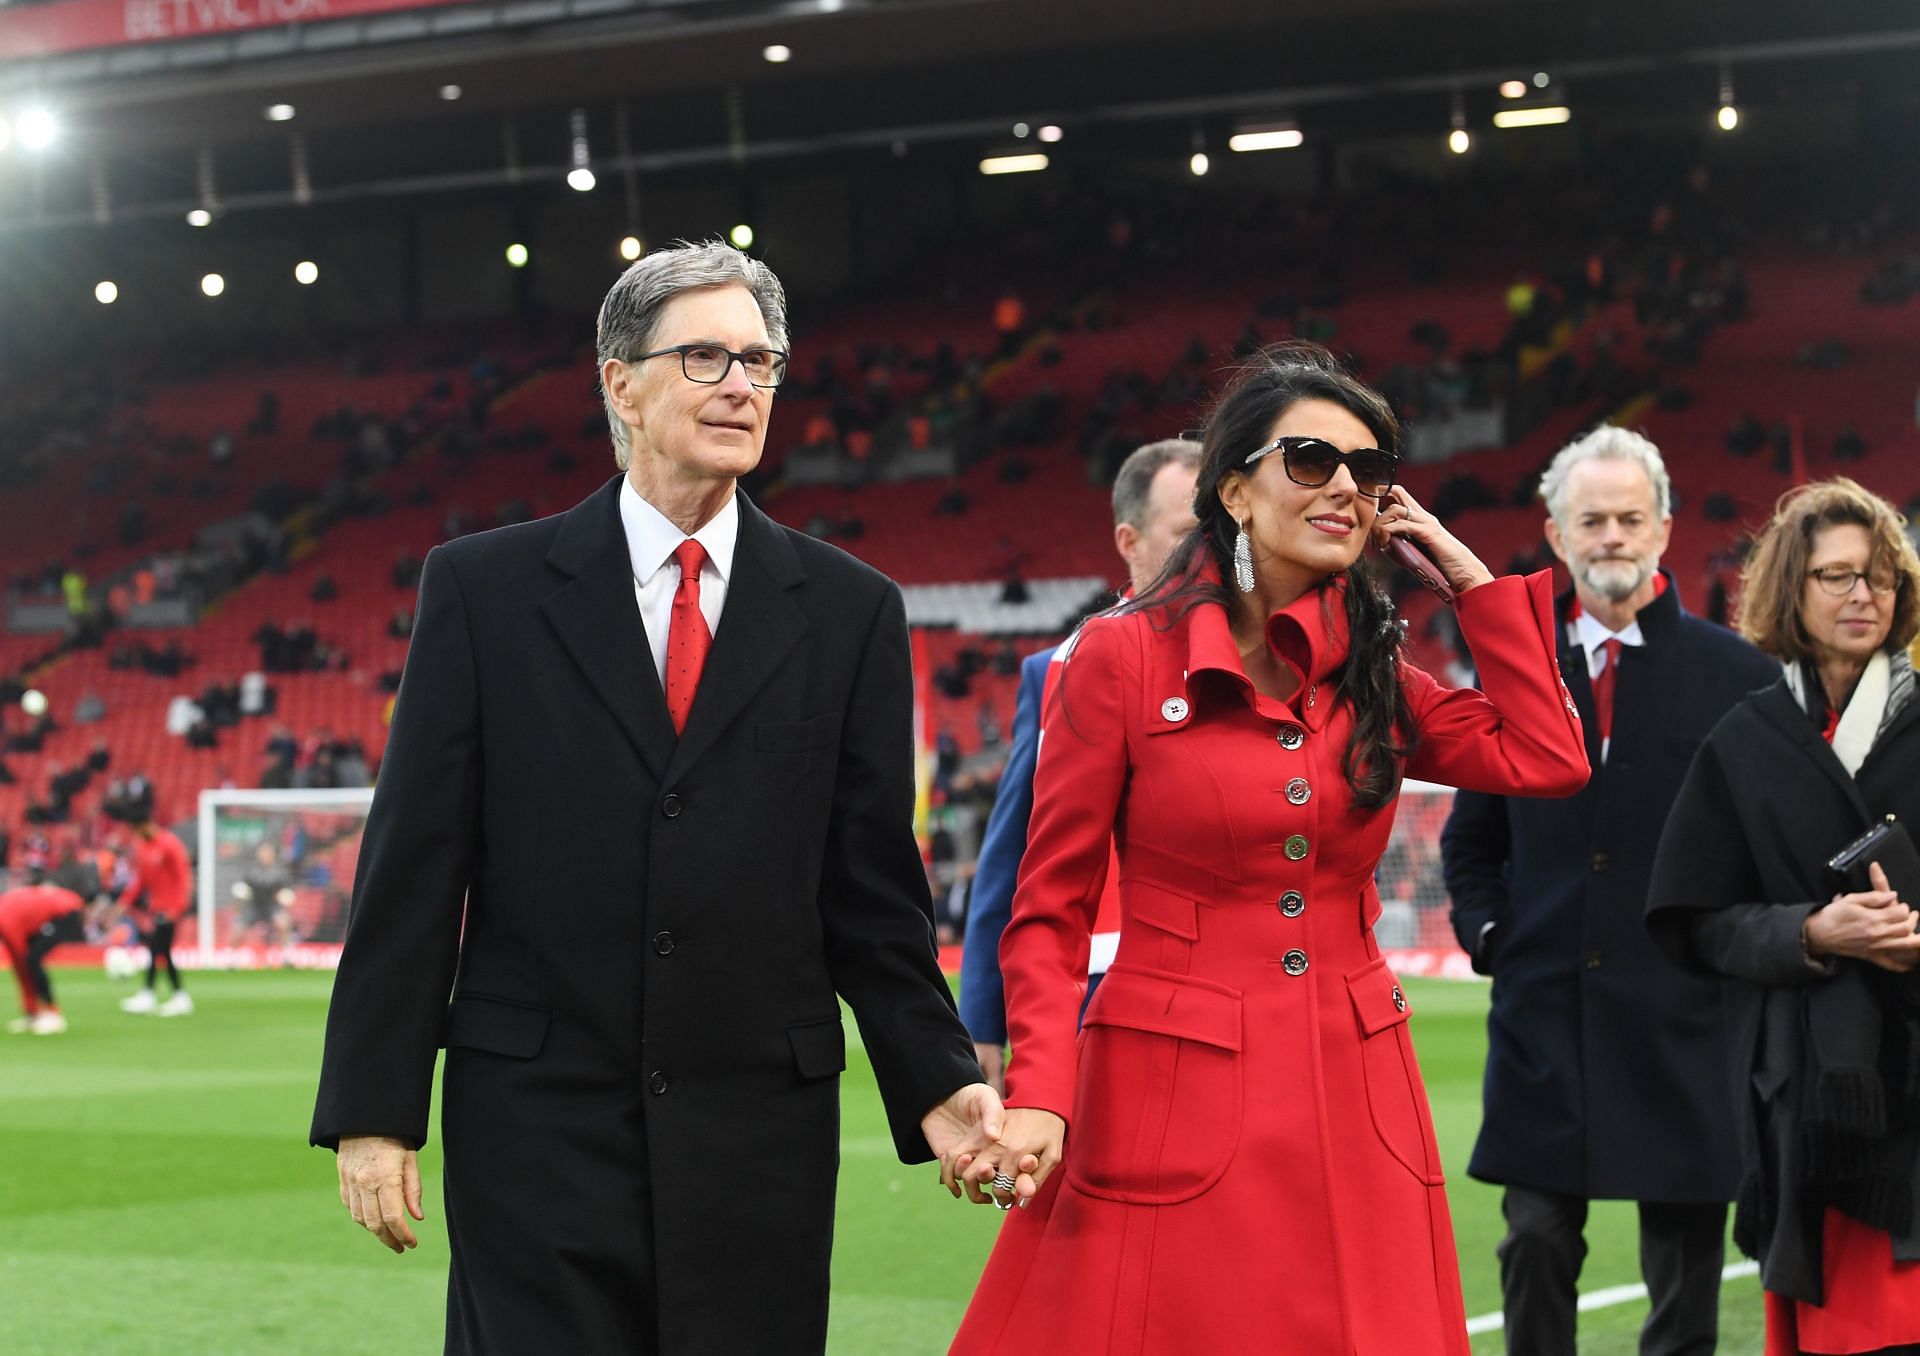 Liverpool owner John W. Henry and wife, Linda Pizzuti - Liverpool FC v Huddersfield Town - EPL